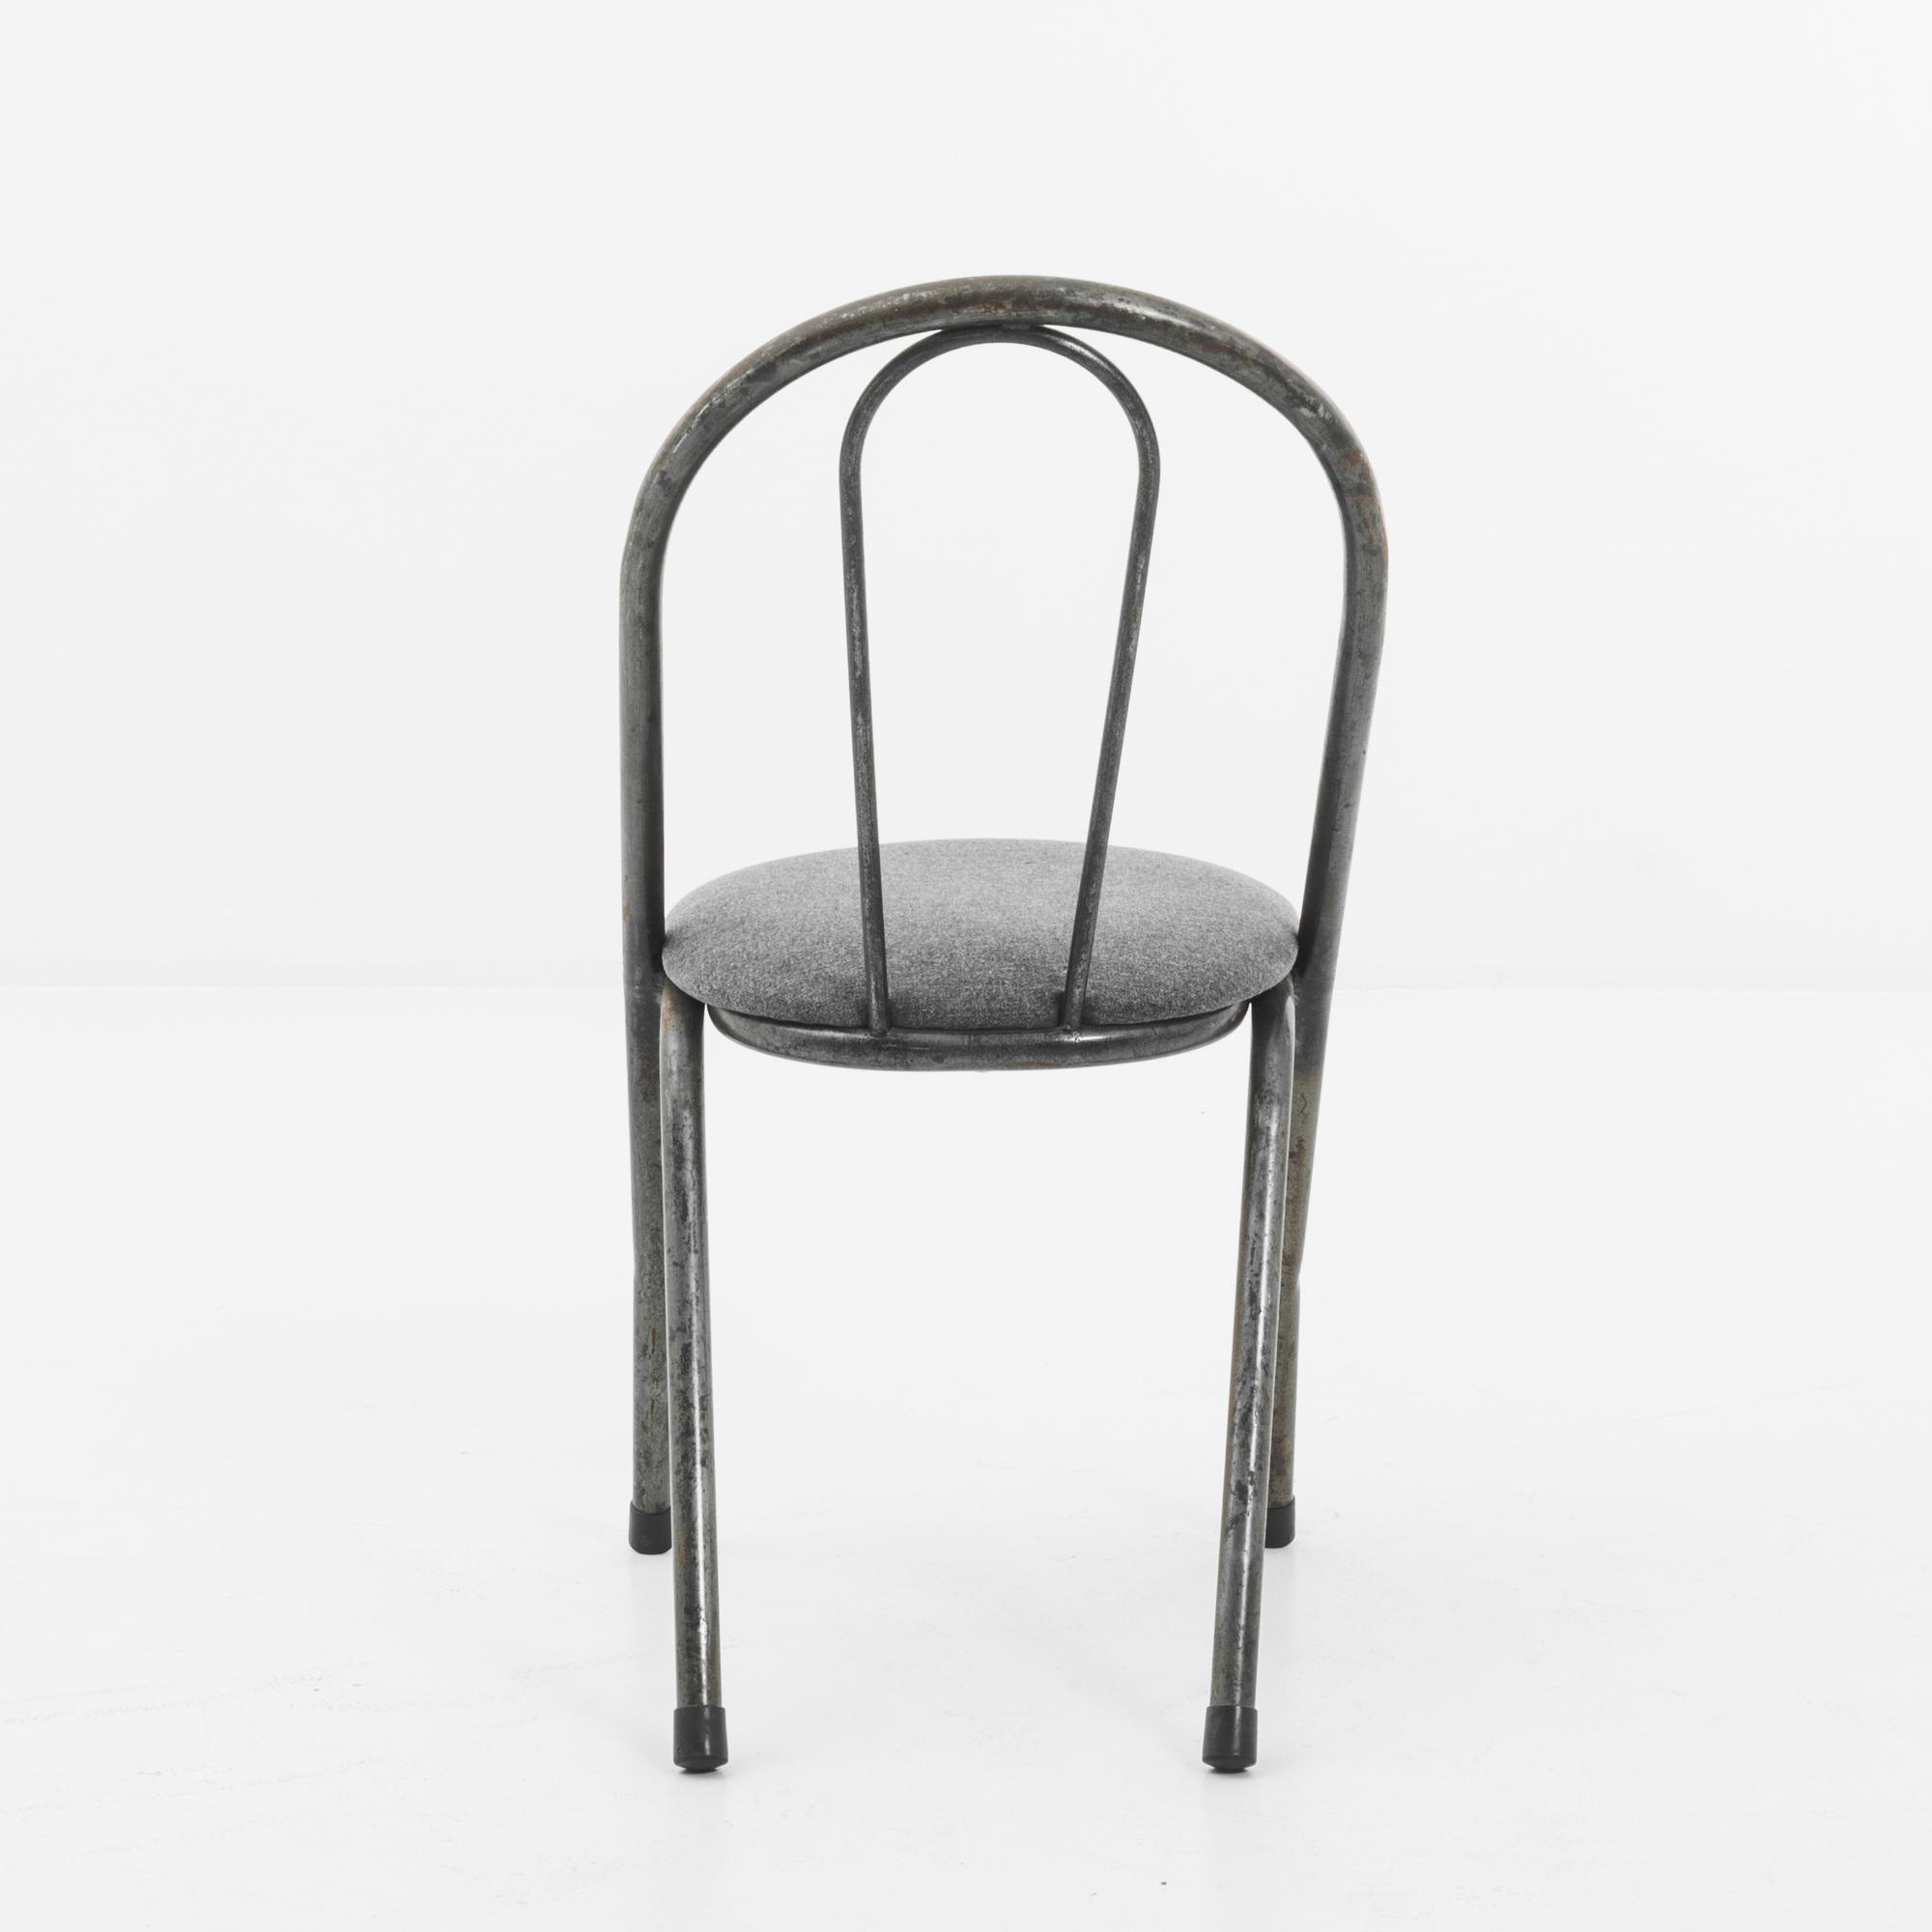 Mid-20th Century 1950s British Metal Chair For Sale